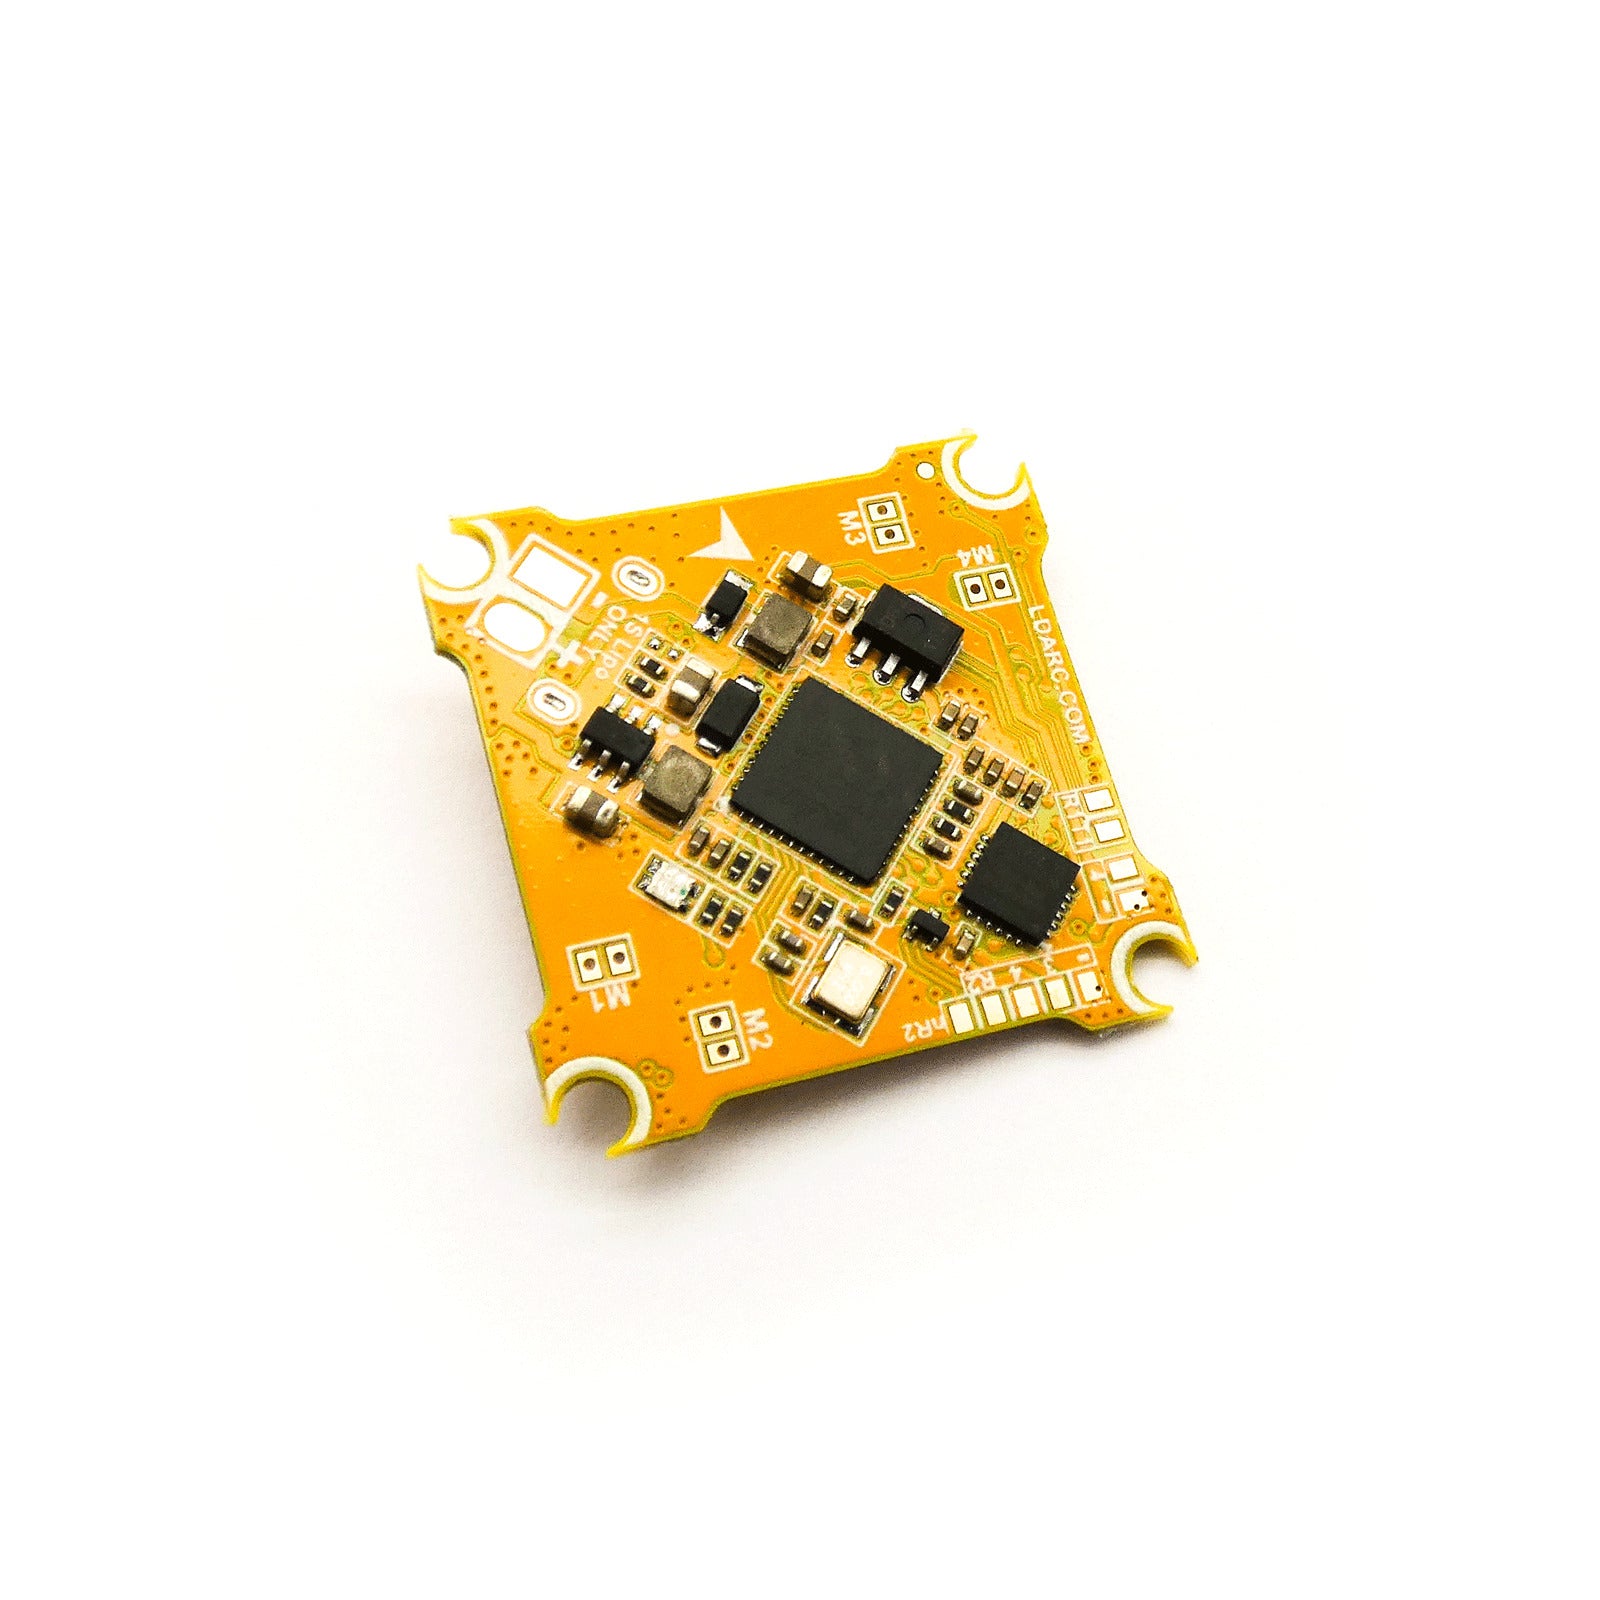 LDARC F411-B2 Brushed Drone Controller with Flip Support